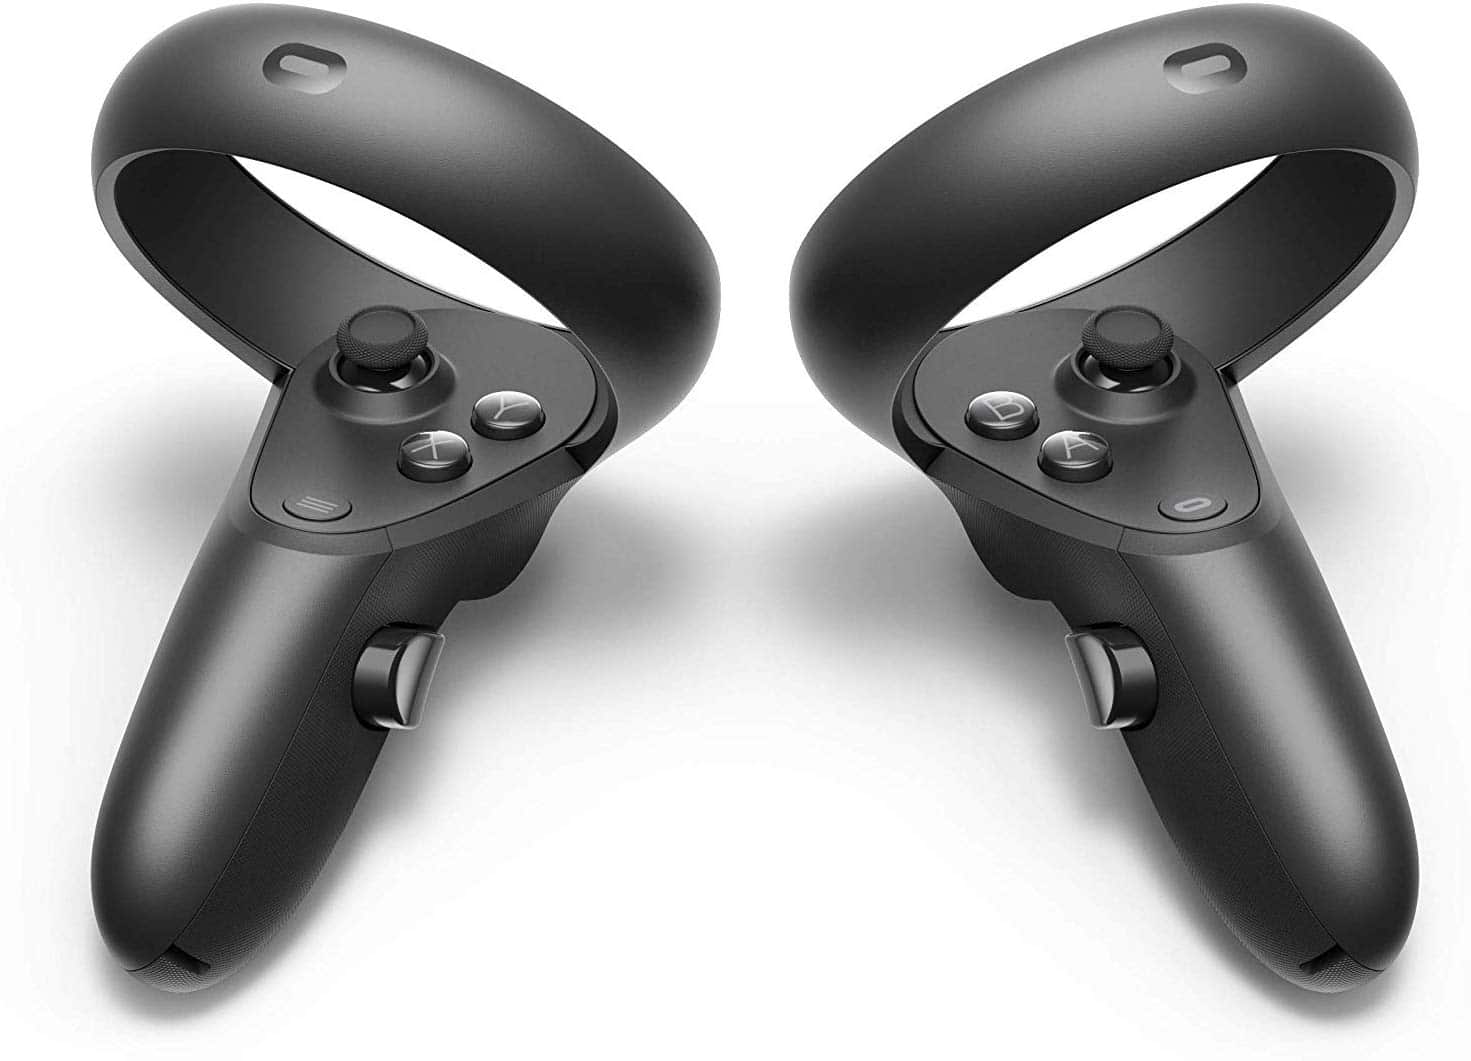 oculus rift s controllers not tracking